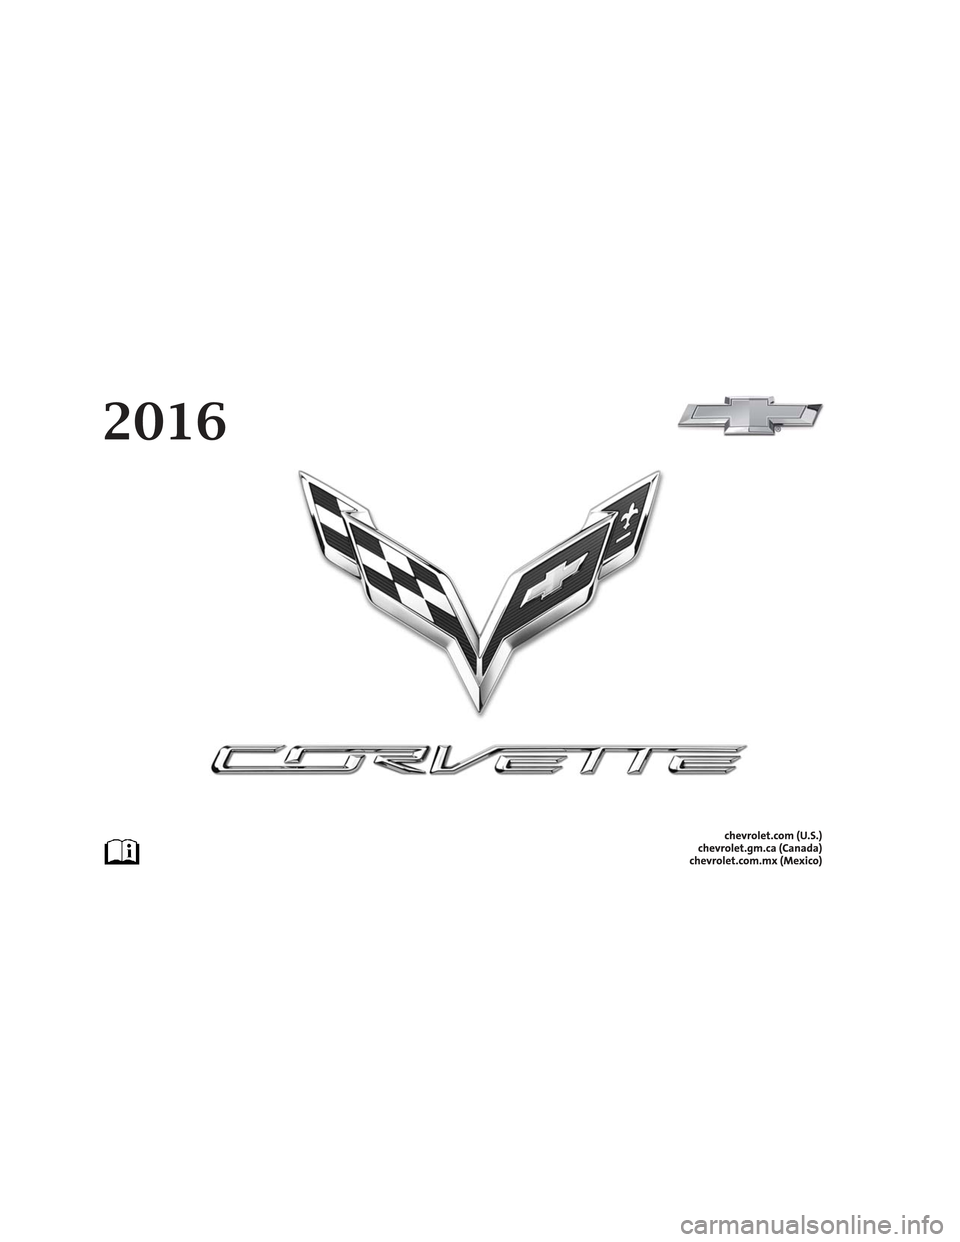 CHEVROLET CORVETTE 2016 7.G Owners Manual Cruze Limited 